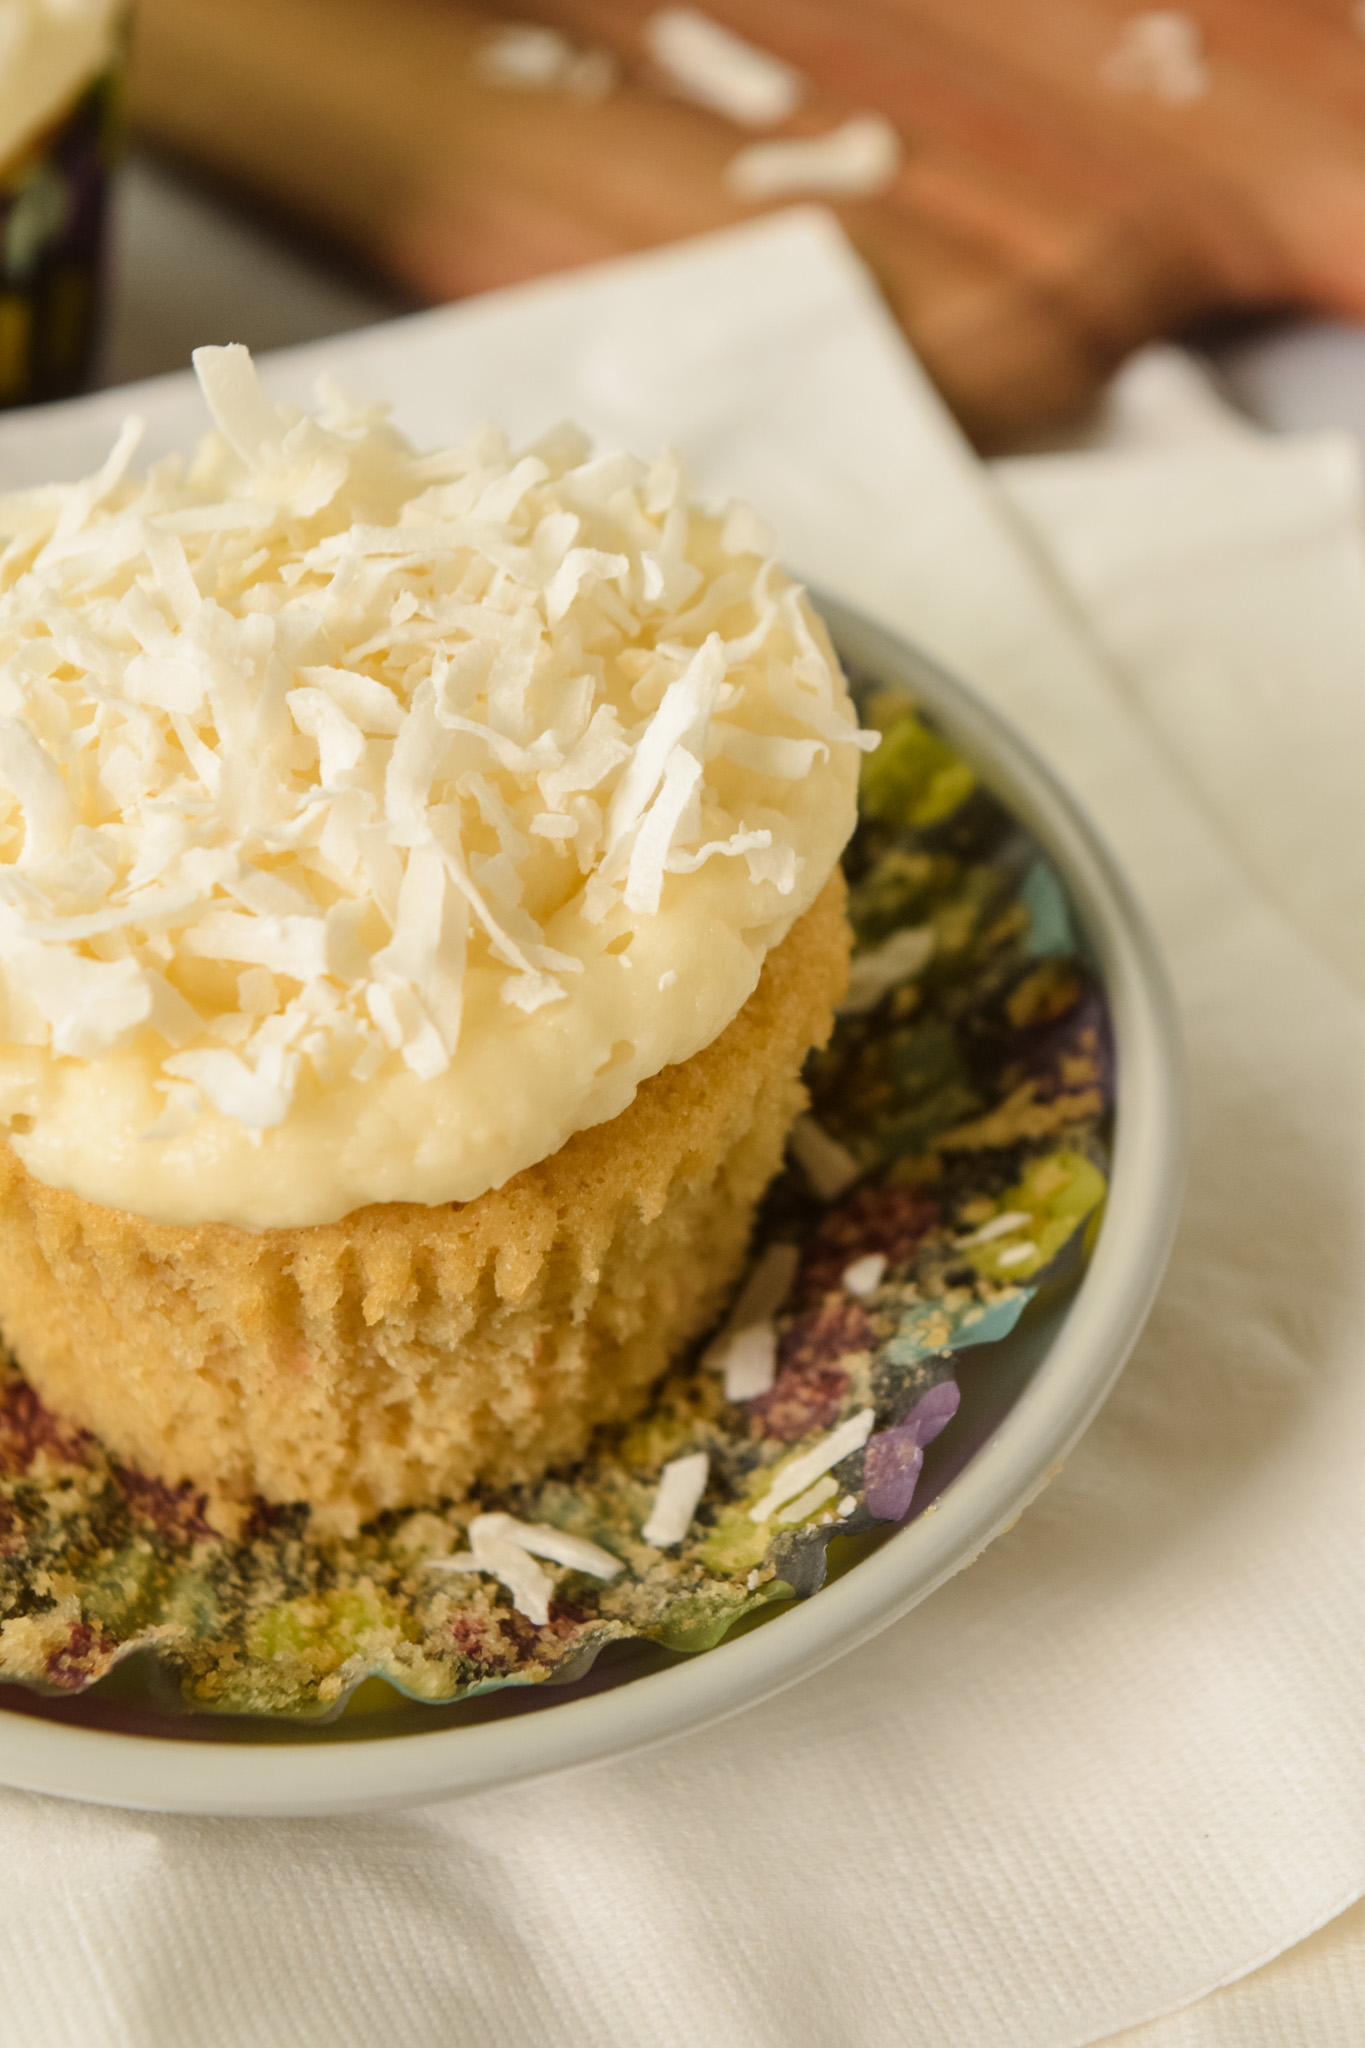 Gluten Free Coconut Cupcakes with Coconut Buttercream and Coconut Flakes